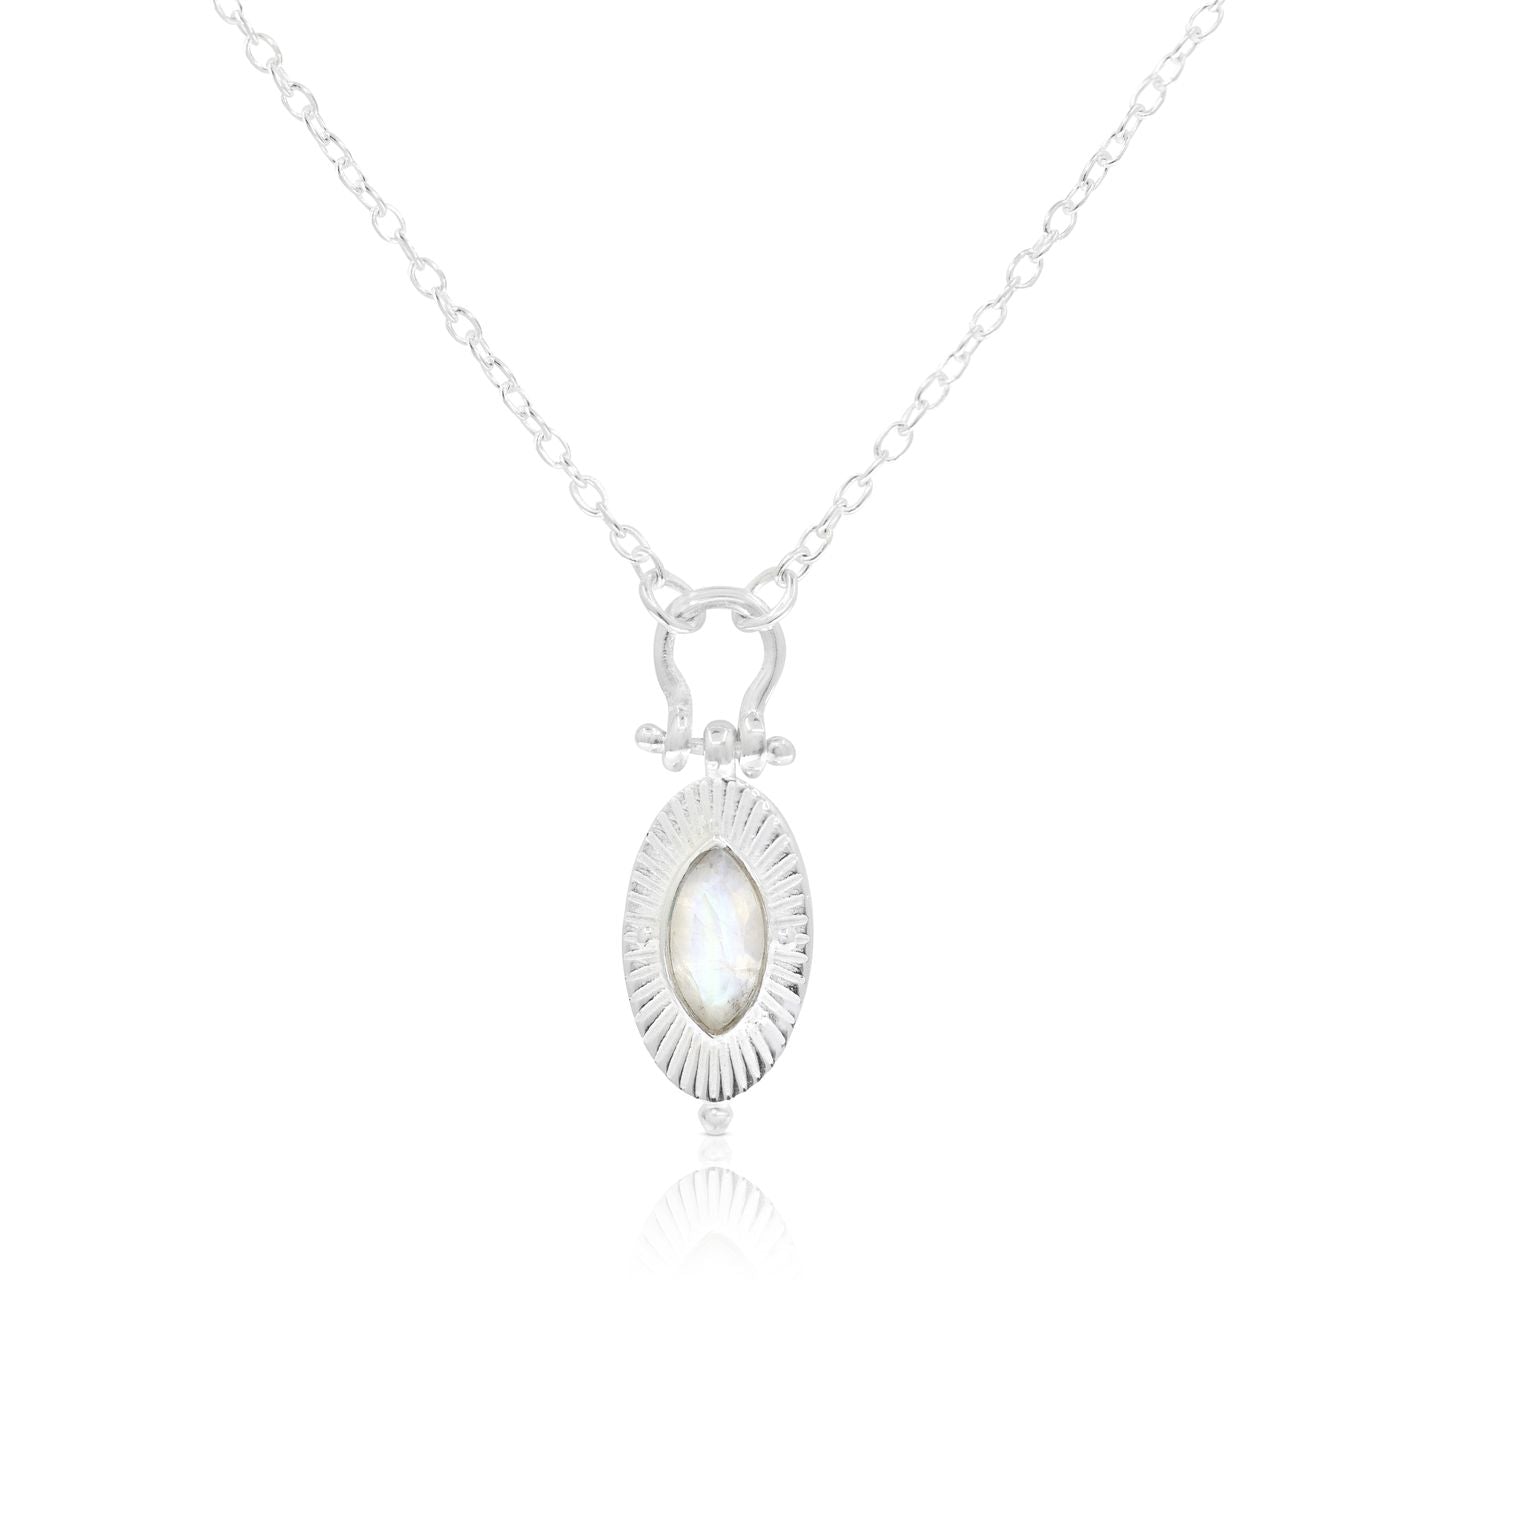 Toni May Radiance Moonstone Silver Necklace